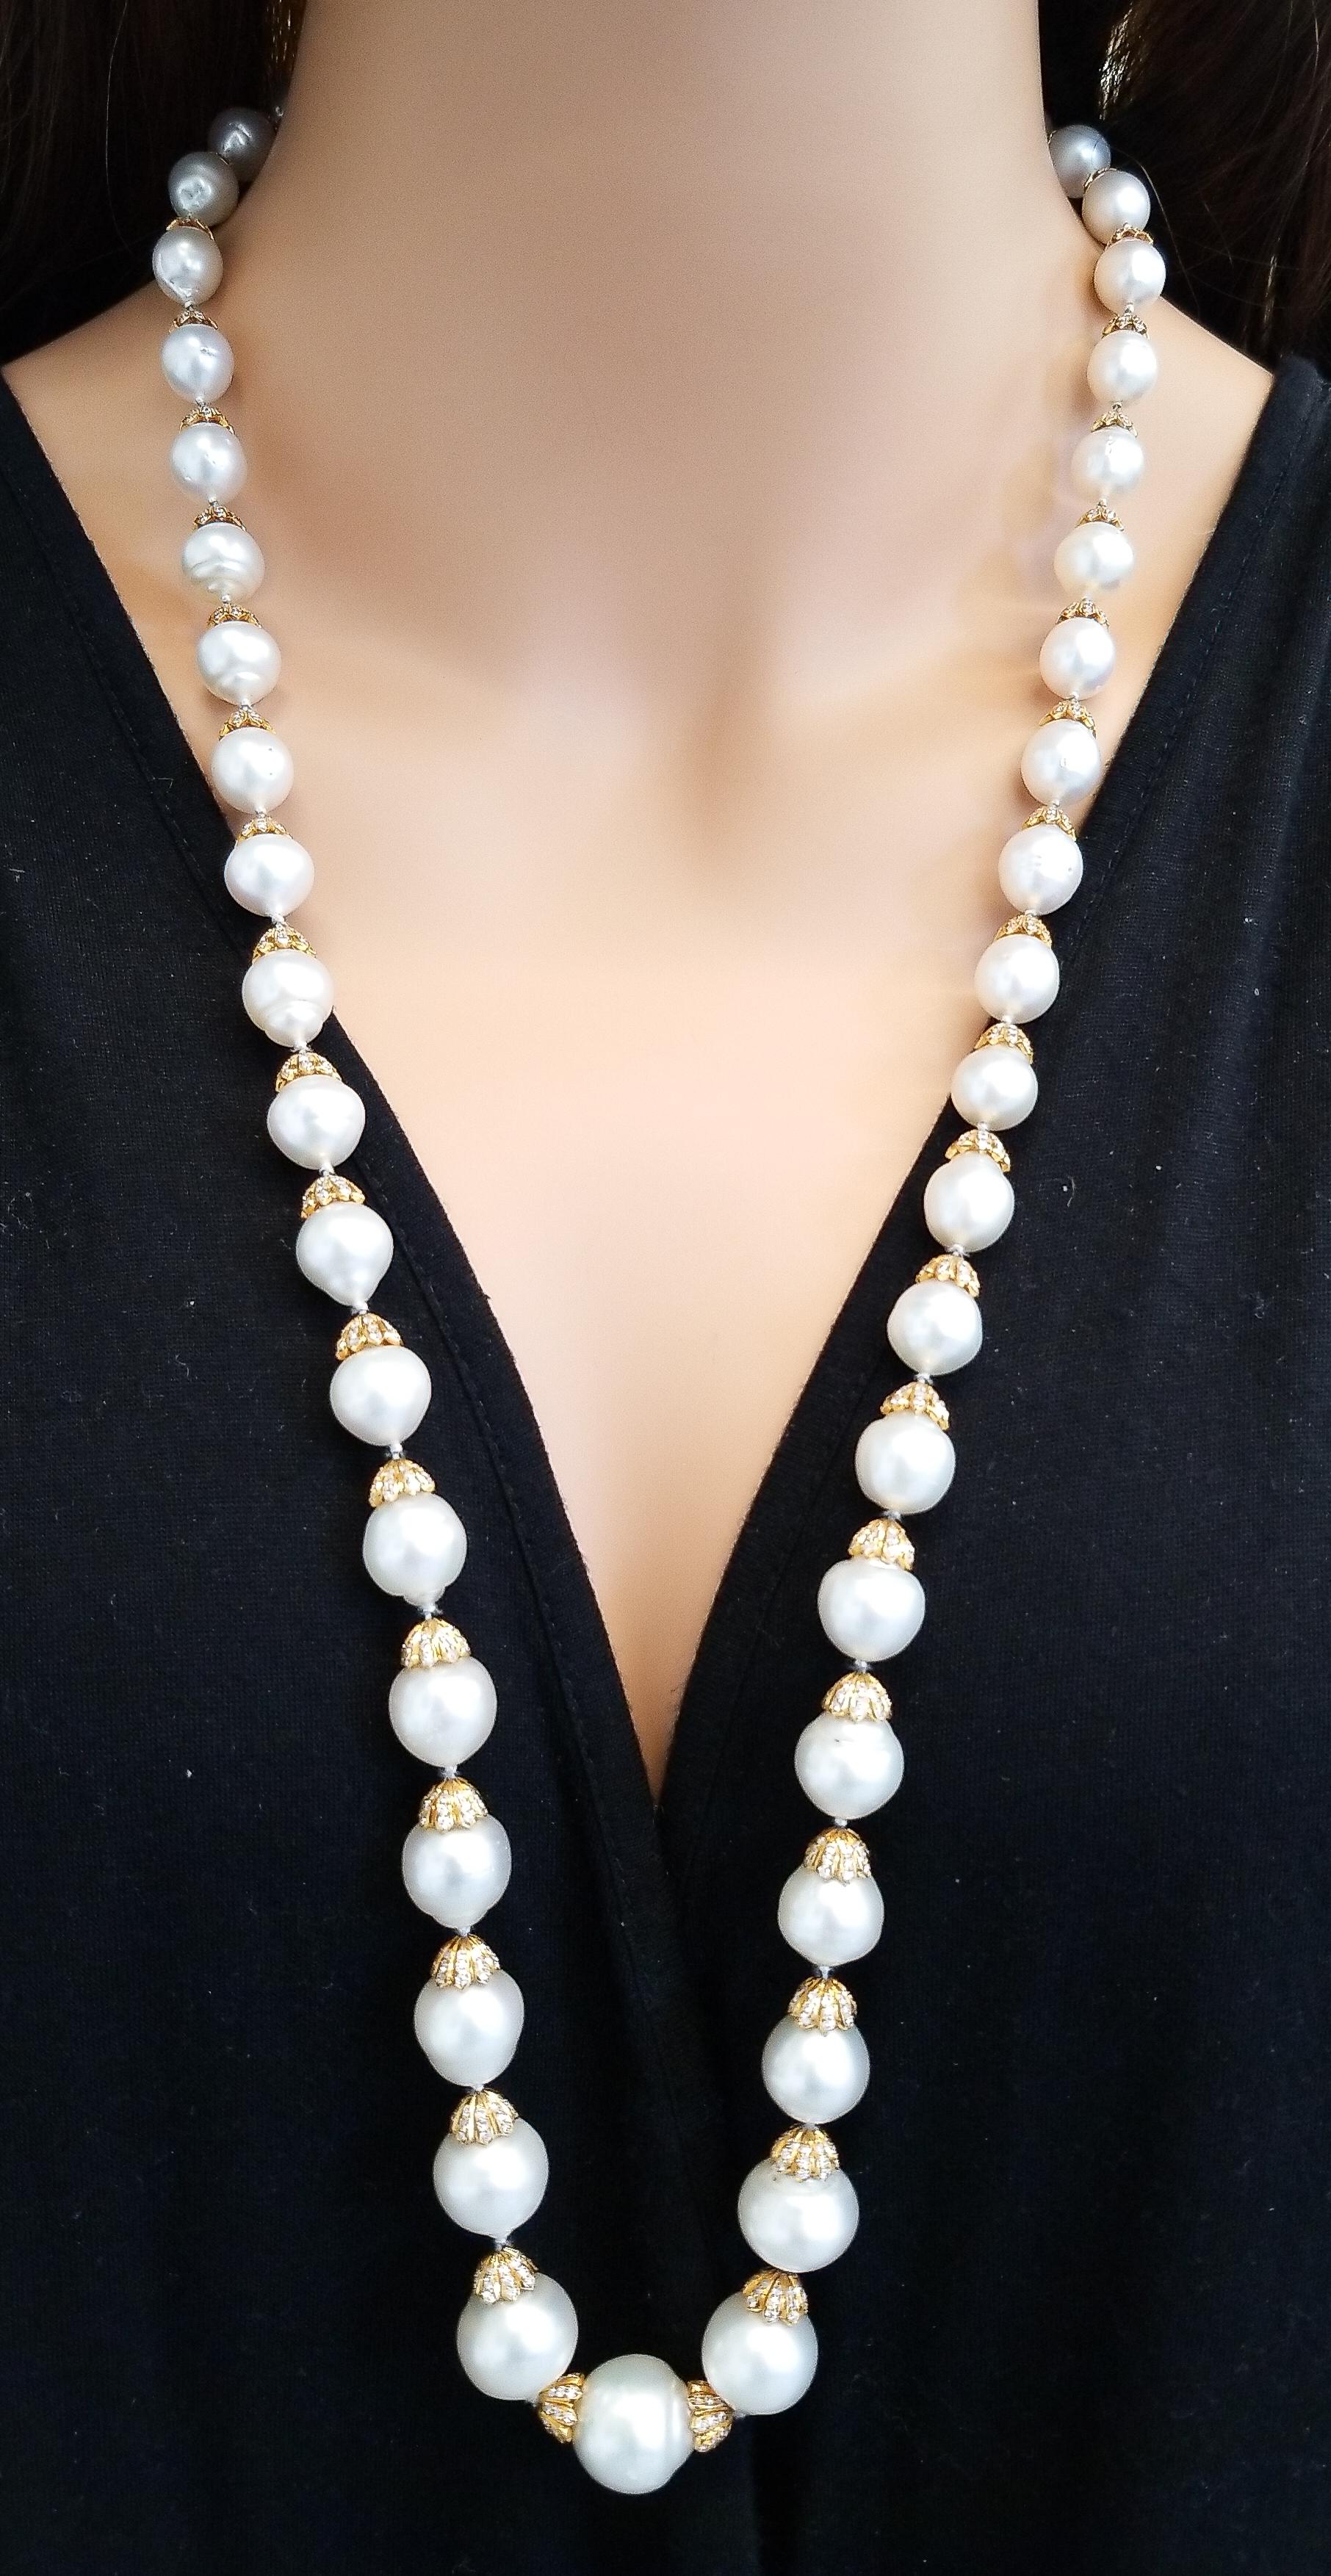 This is a truly special Australian South Sea pearl necklace measuring an impressive 34 inches in length and features white South Sea pearls that measure 15 mm to 8 mm in diameter, all hand-strung perfectly. Rich brightly polished 18 yellow gold cap